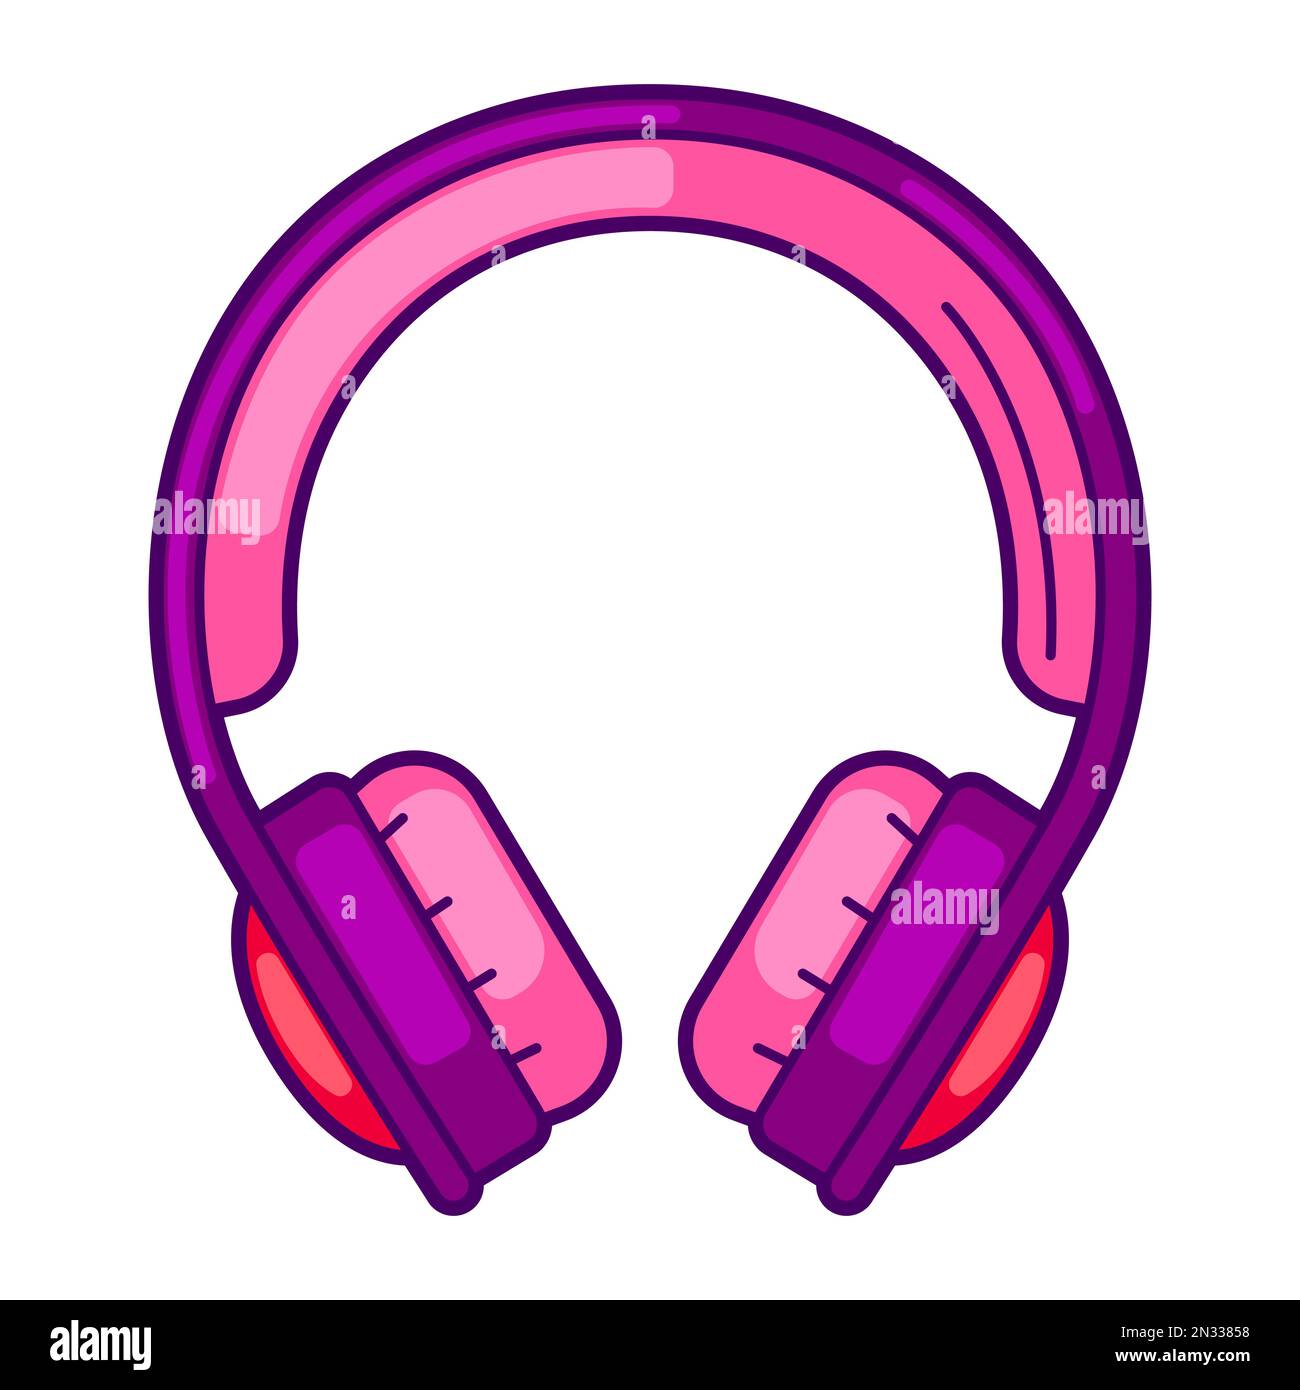 Illustration of headphones. Colorful cute icon. Creative symbol in cartoon style. Stock Vector